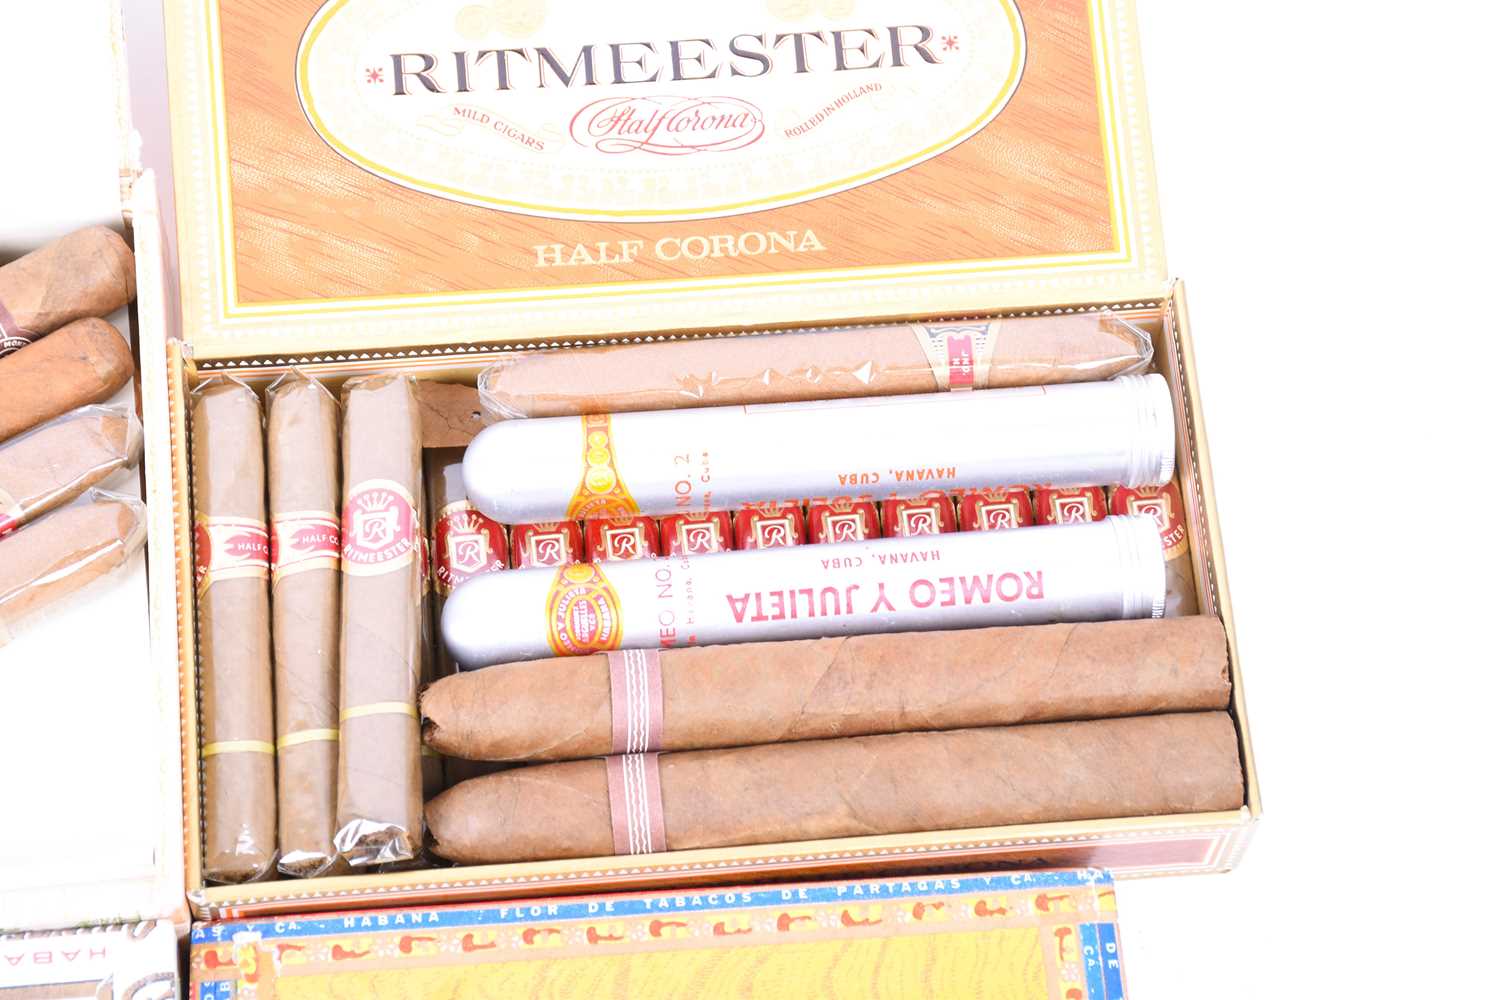 A collection of assorted cigars, including an unopened box of Quintero y Hno Cienfuegos cigars, - Image 8 of 20